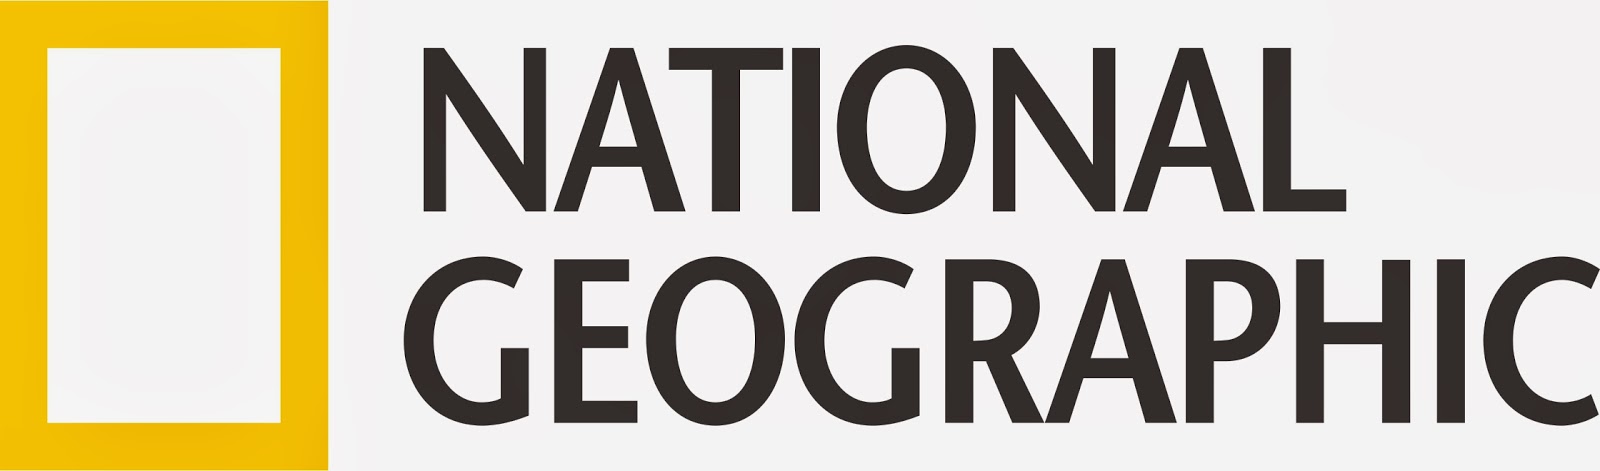 National Geographic Logo   Nat Geo Logo Vector Png - Nat Geo Vector, Transparent background PNG HD thumbnail